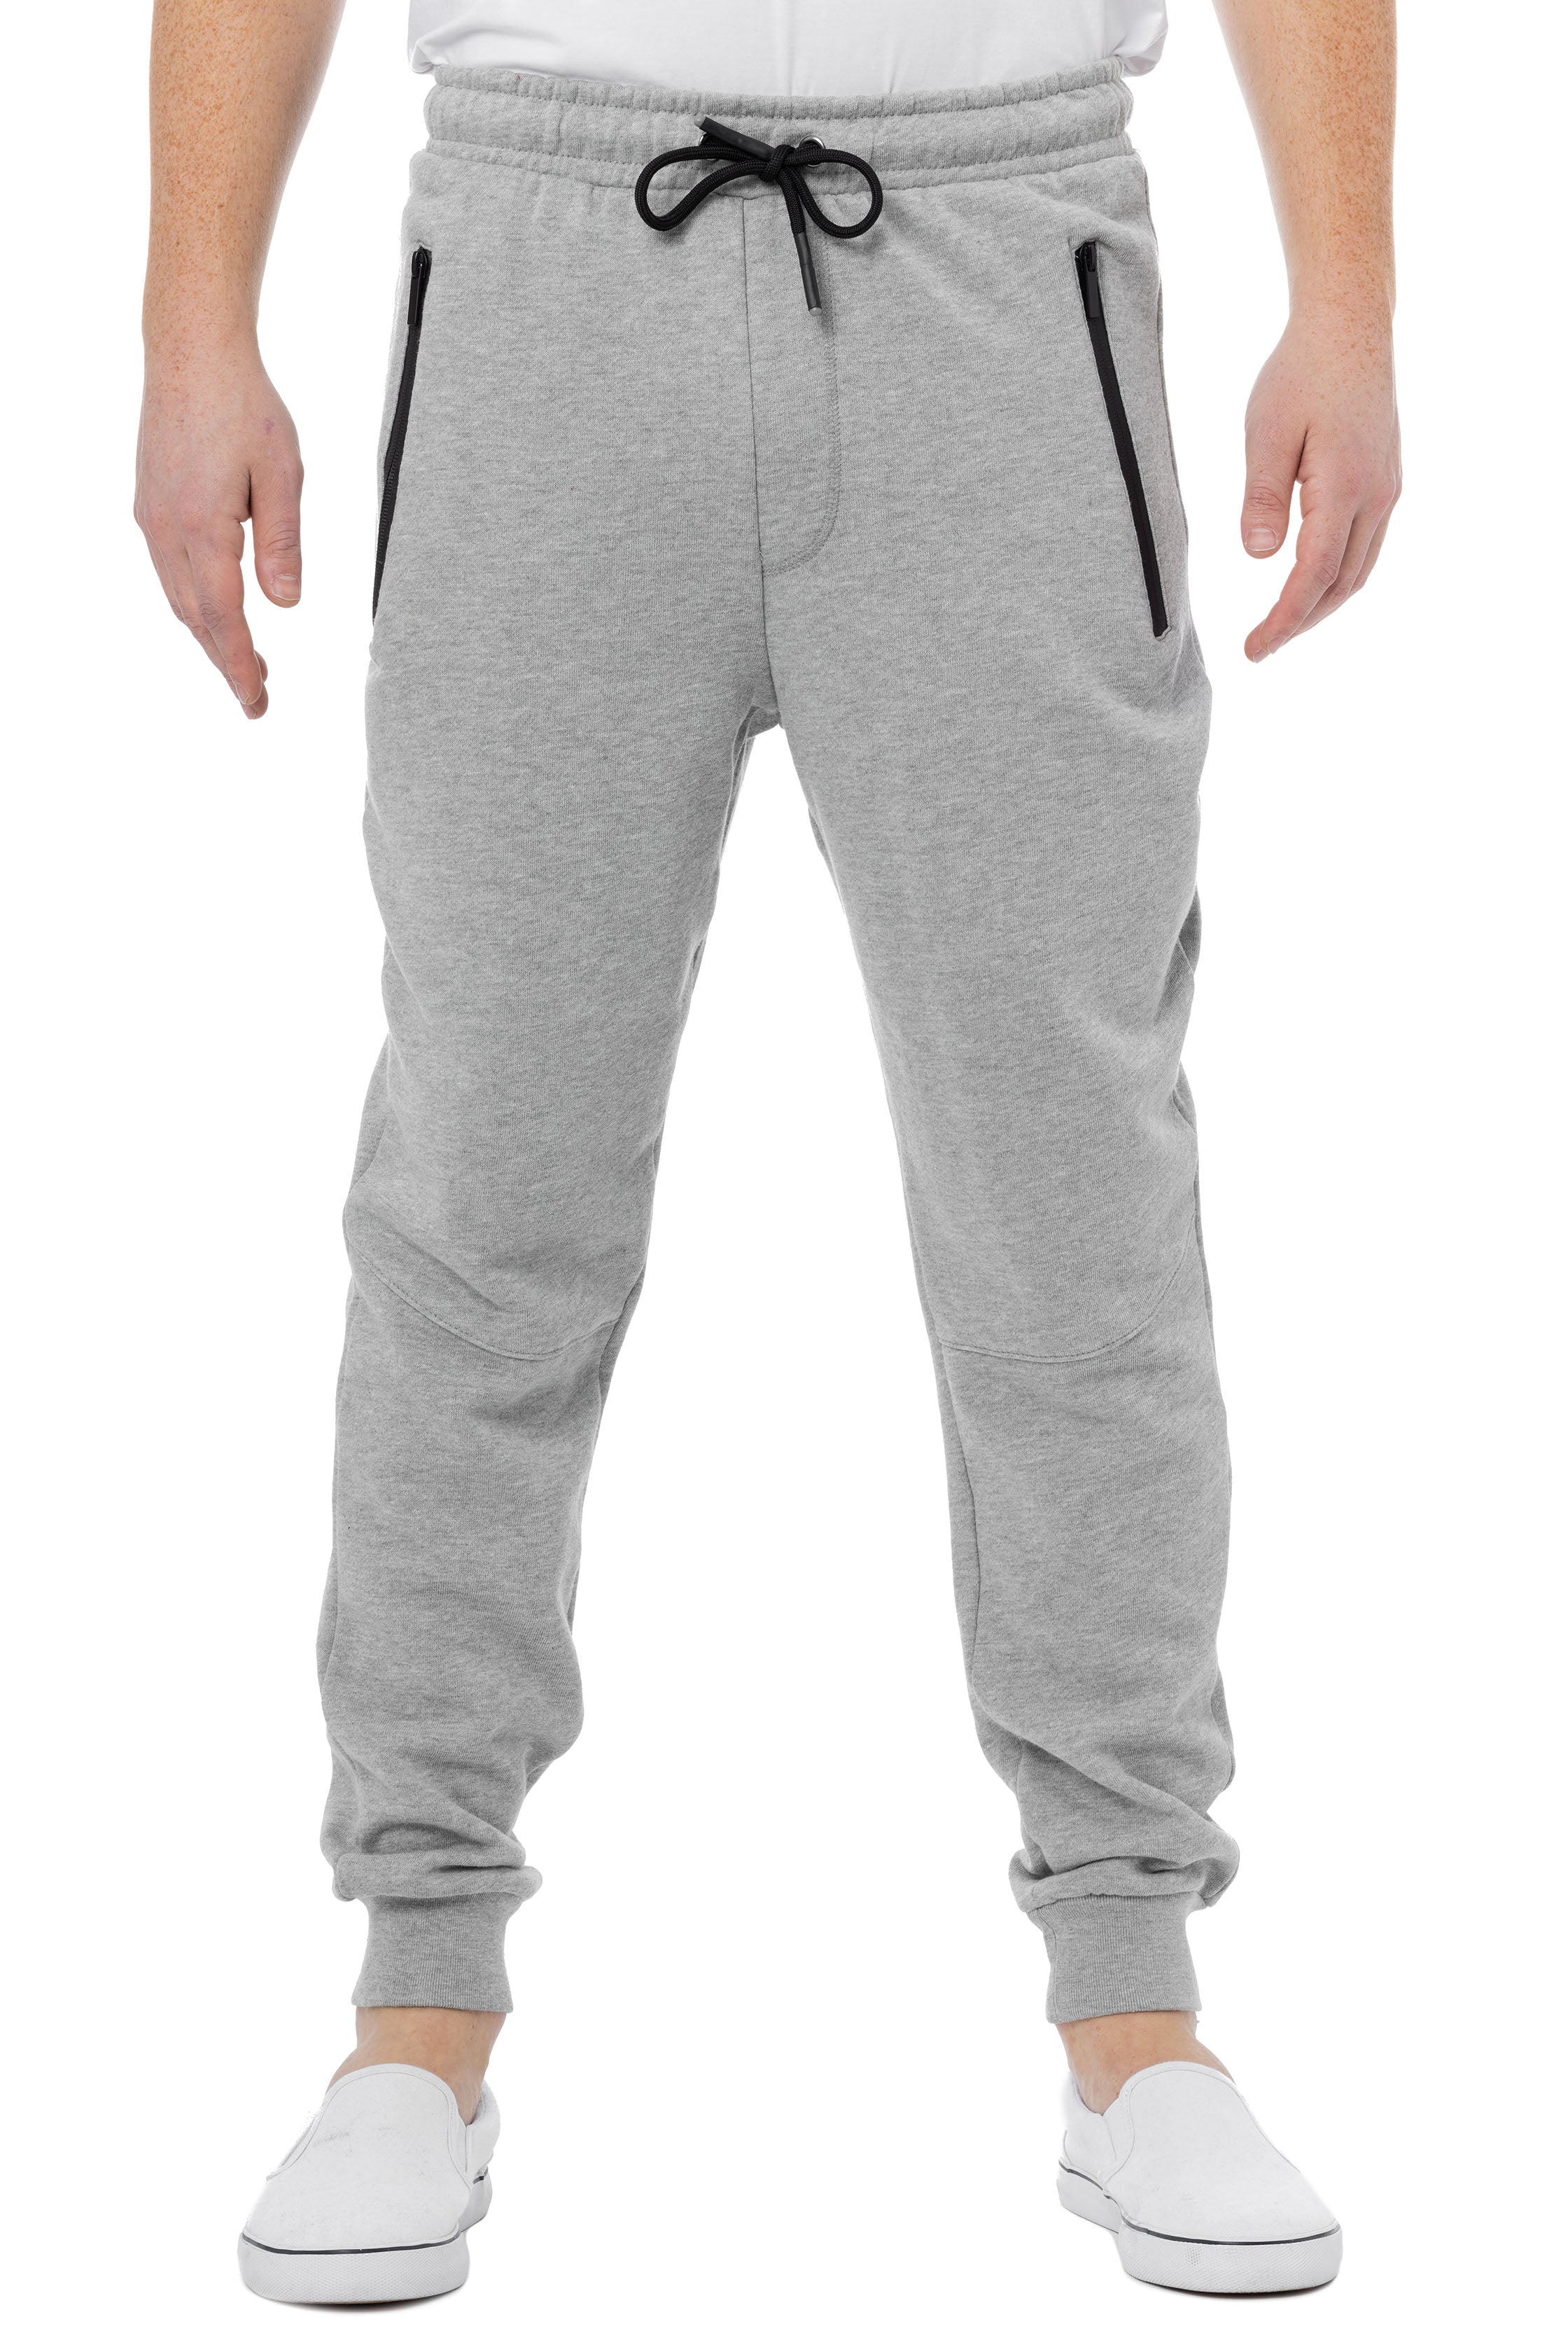 Ouber Mens Gym Jogger Pants Slim Fit Workout Running Sweatpants with Zipper  Pockets